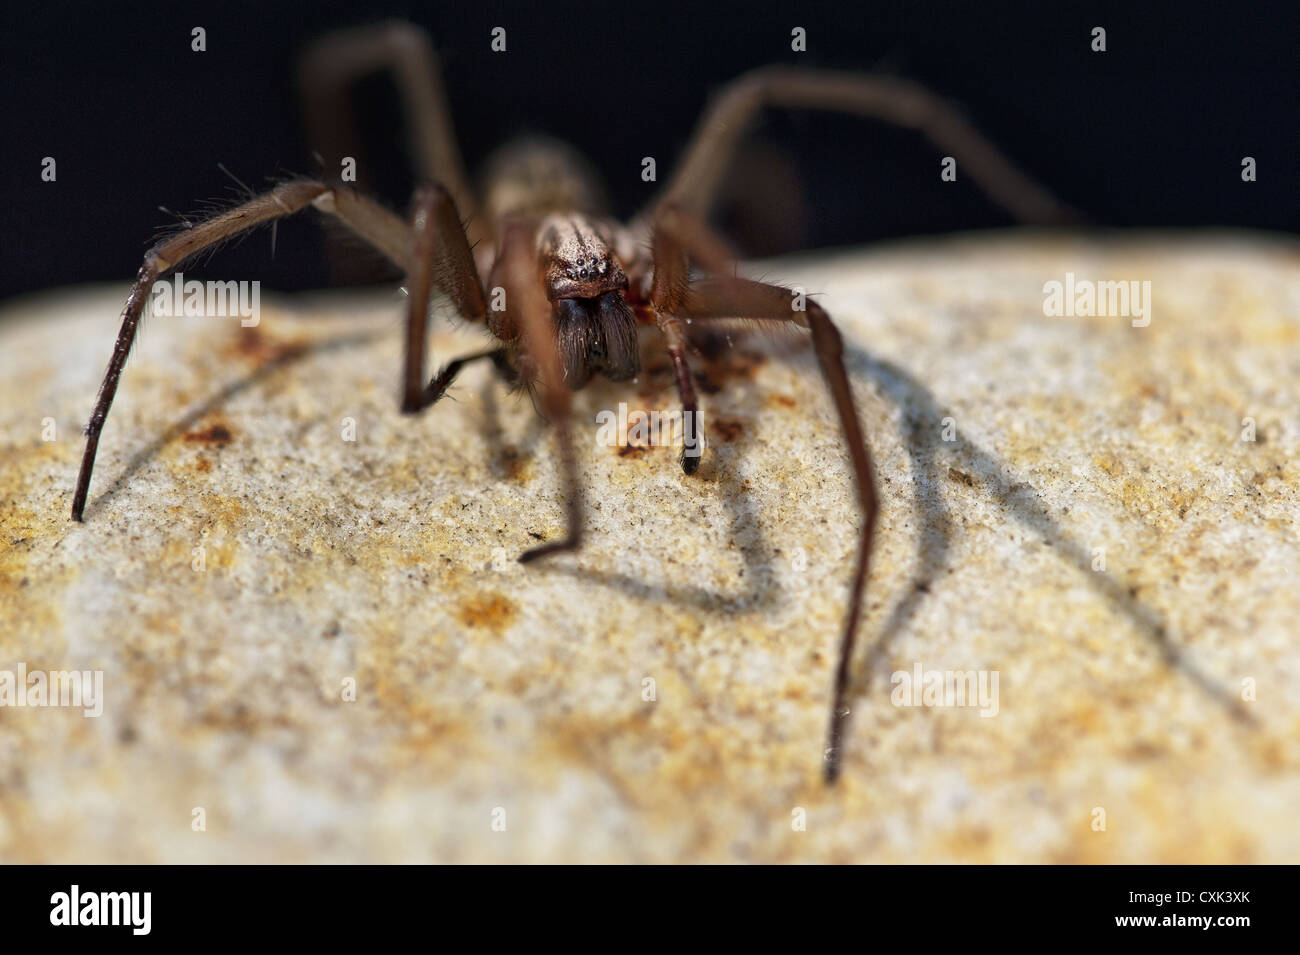 Large angles spider sitting on a rock Stock Photo